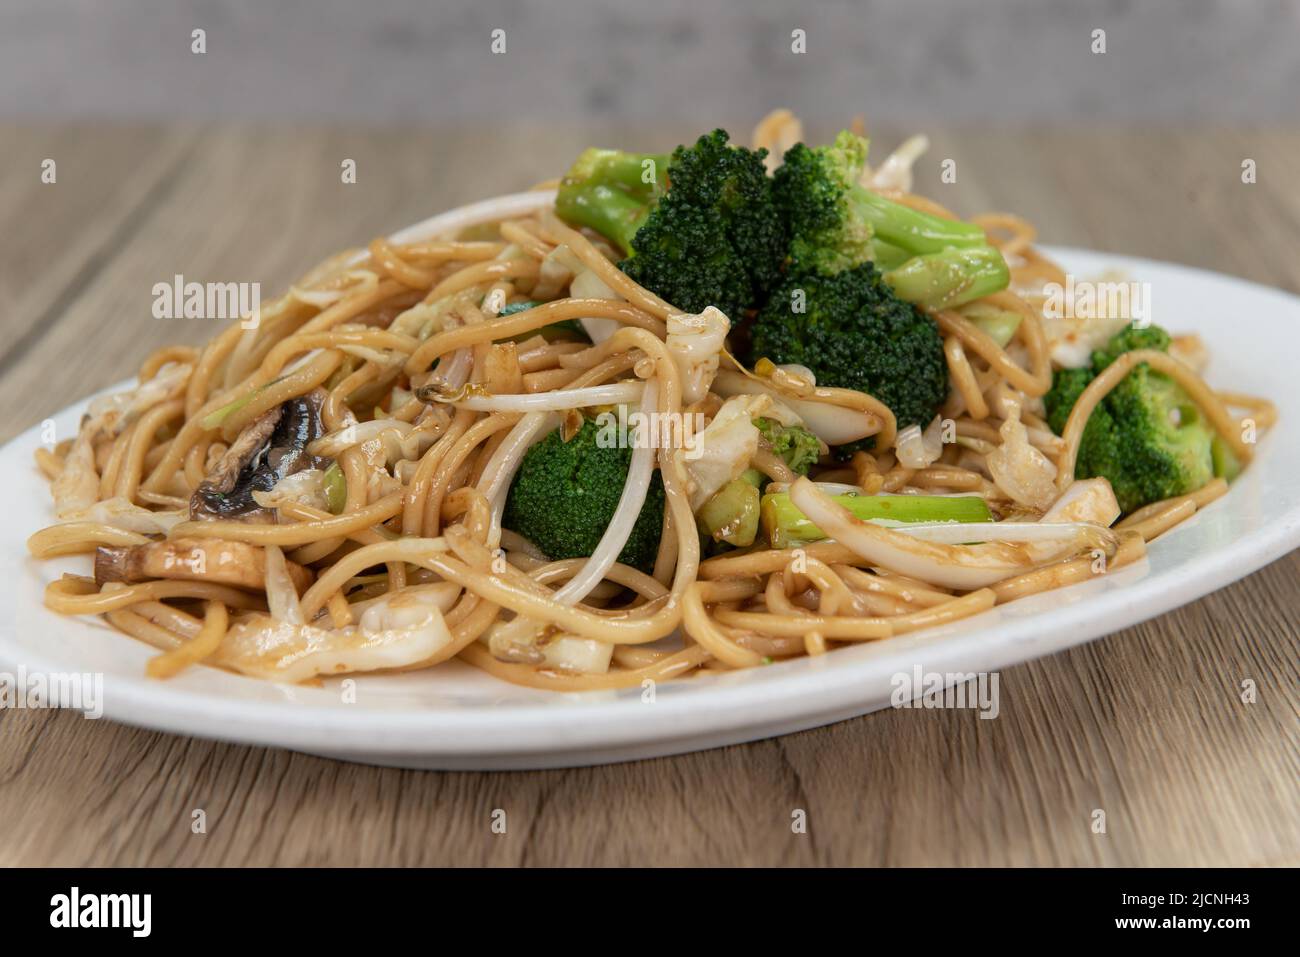 Generous plate of vegetable noodles glazed in sauce and piled high on the plate for a great Chinese food meal. Stock Photo